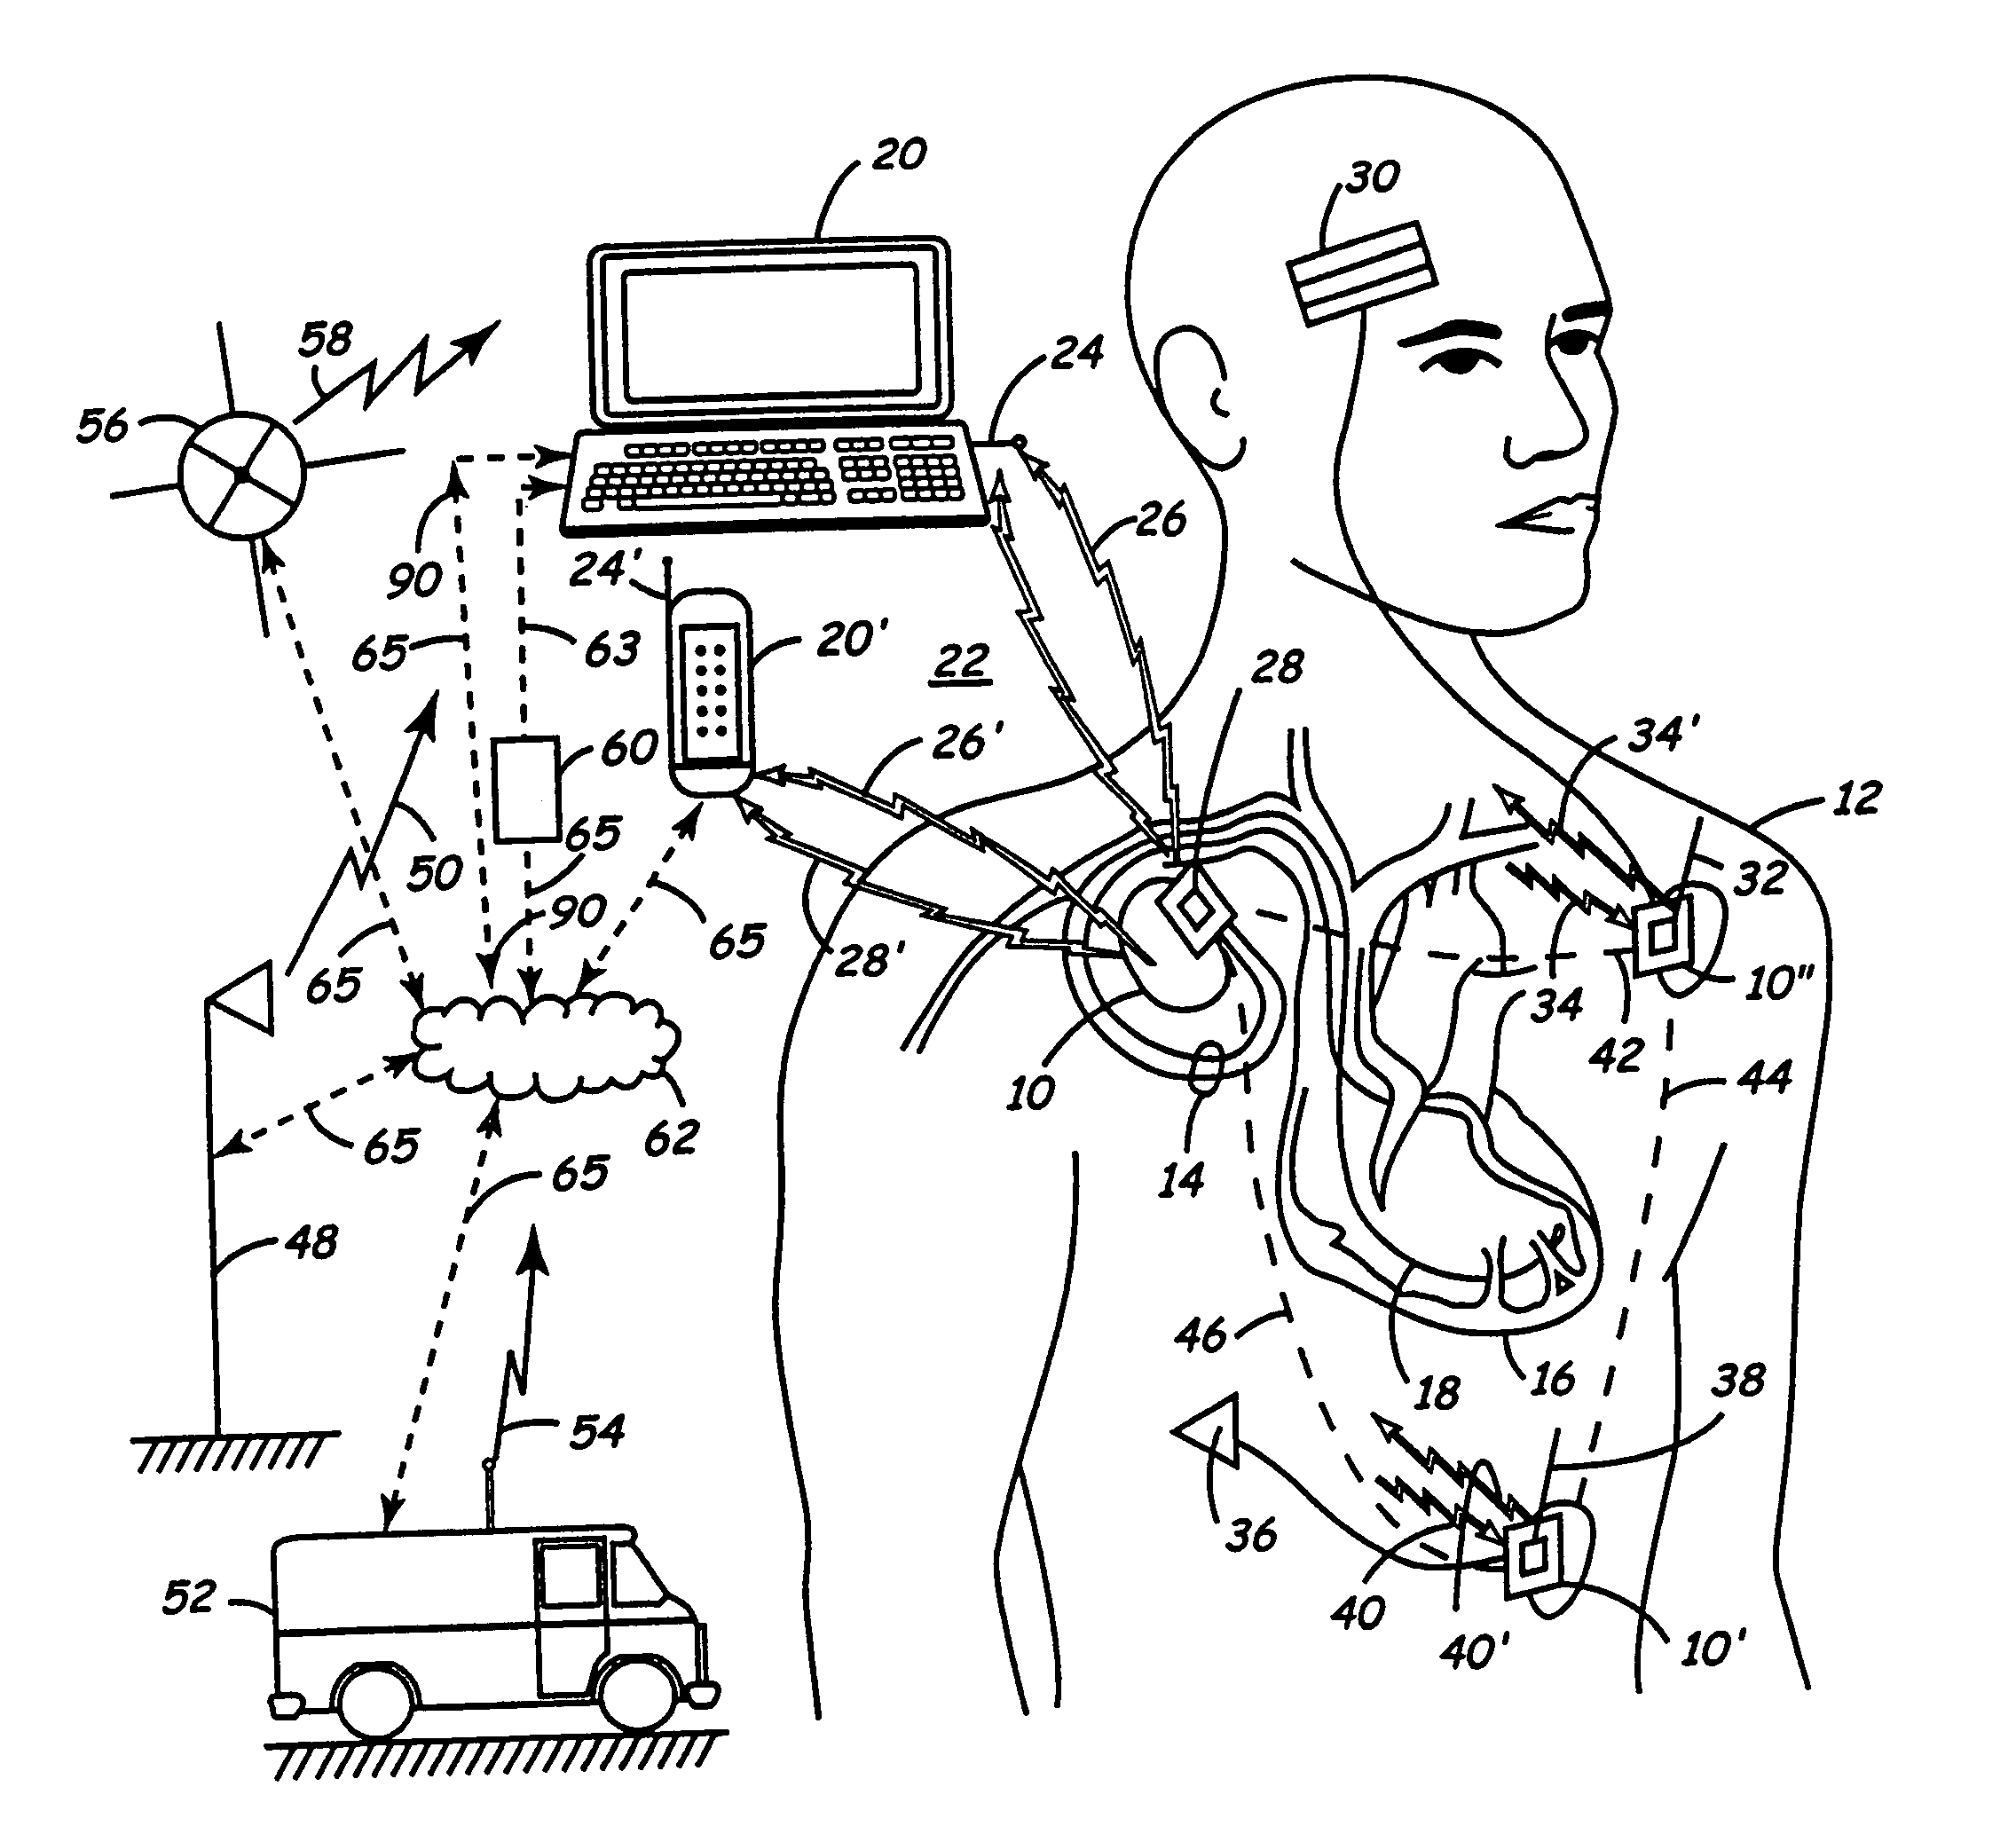 Communications system for an implantable medical device and a delivery device